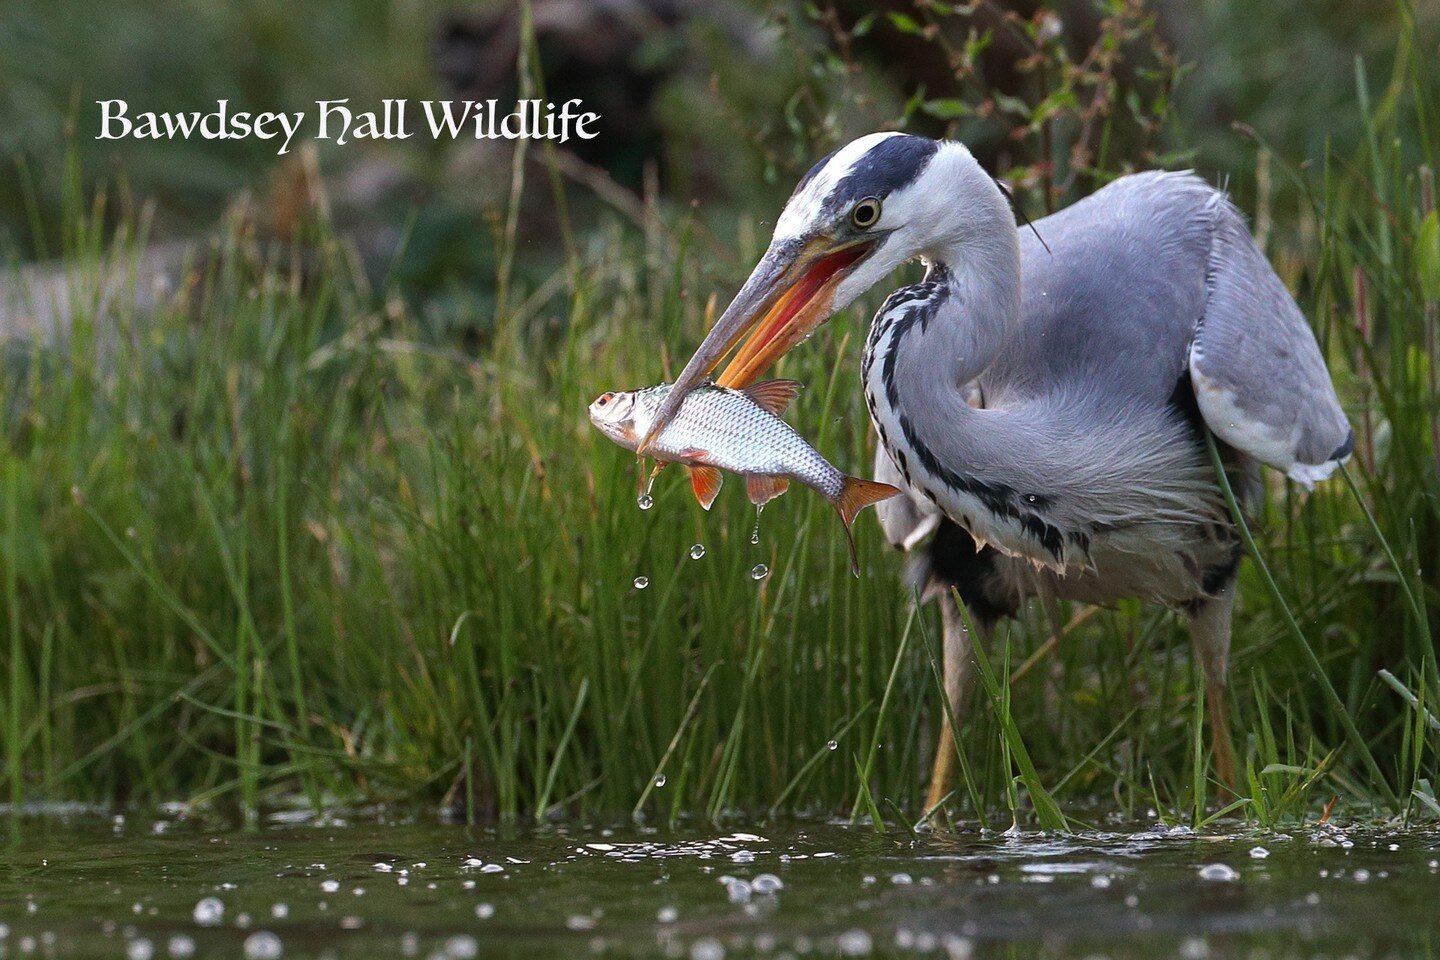 Look at the size of that #fish!!!!

We have a cheeky #heron that visits and has a bite to eat at the reflection pond too, alongside our #badgers, #owls, #polecats and #muntjac! 

https://bookwhen.com/bawdseyhallwildlifehides

Accommodation is also av